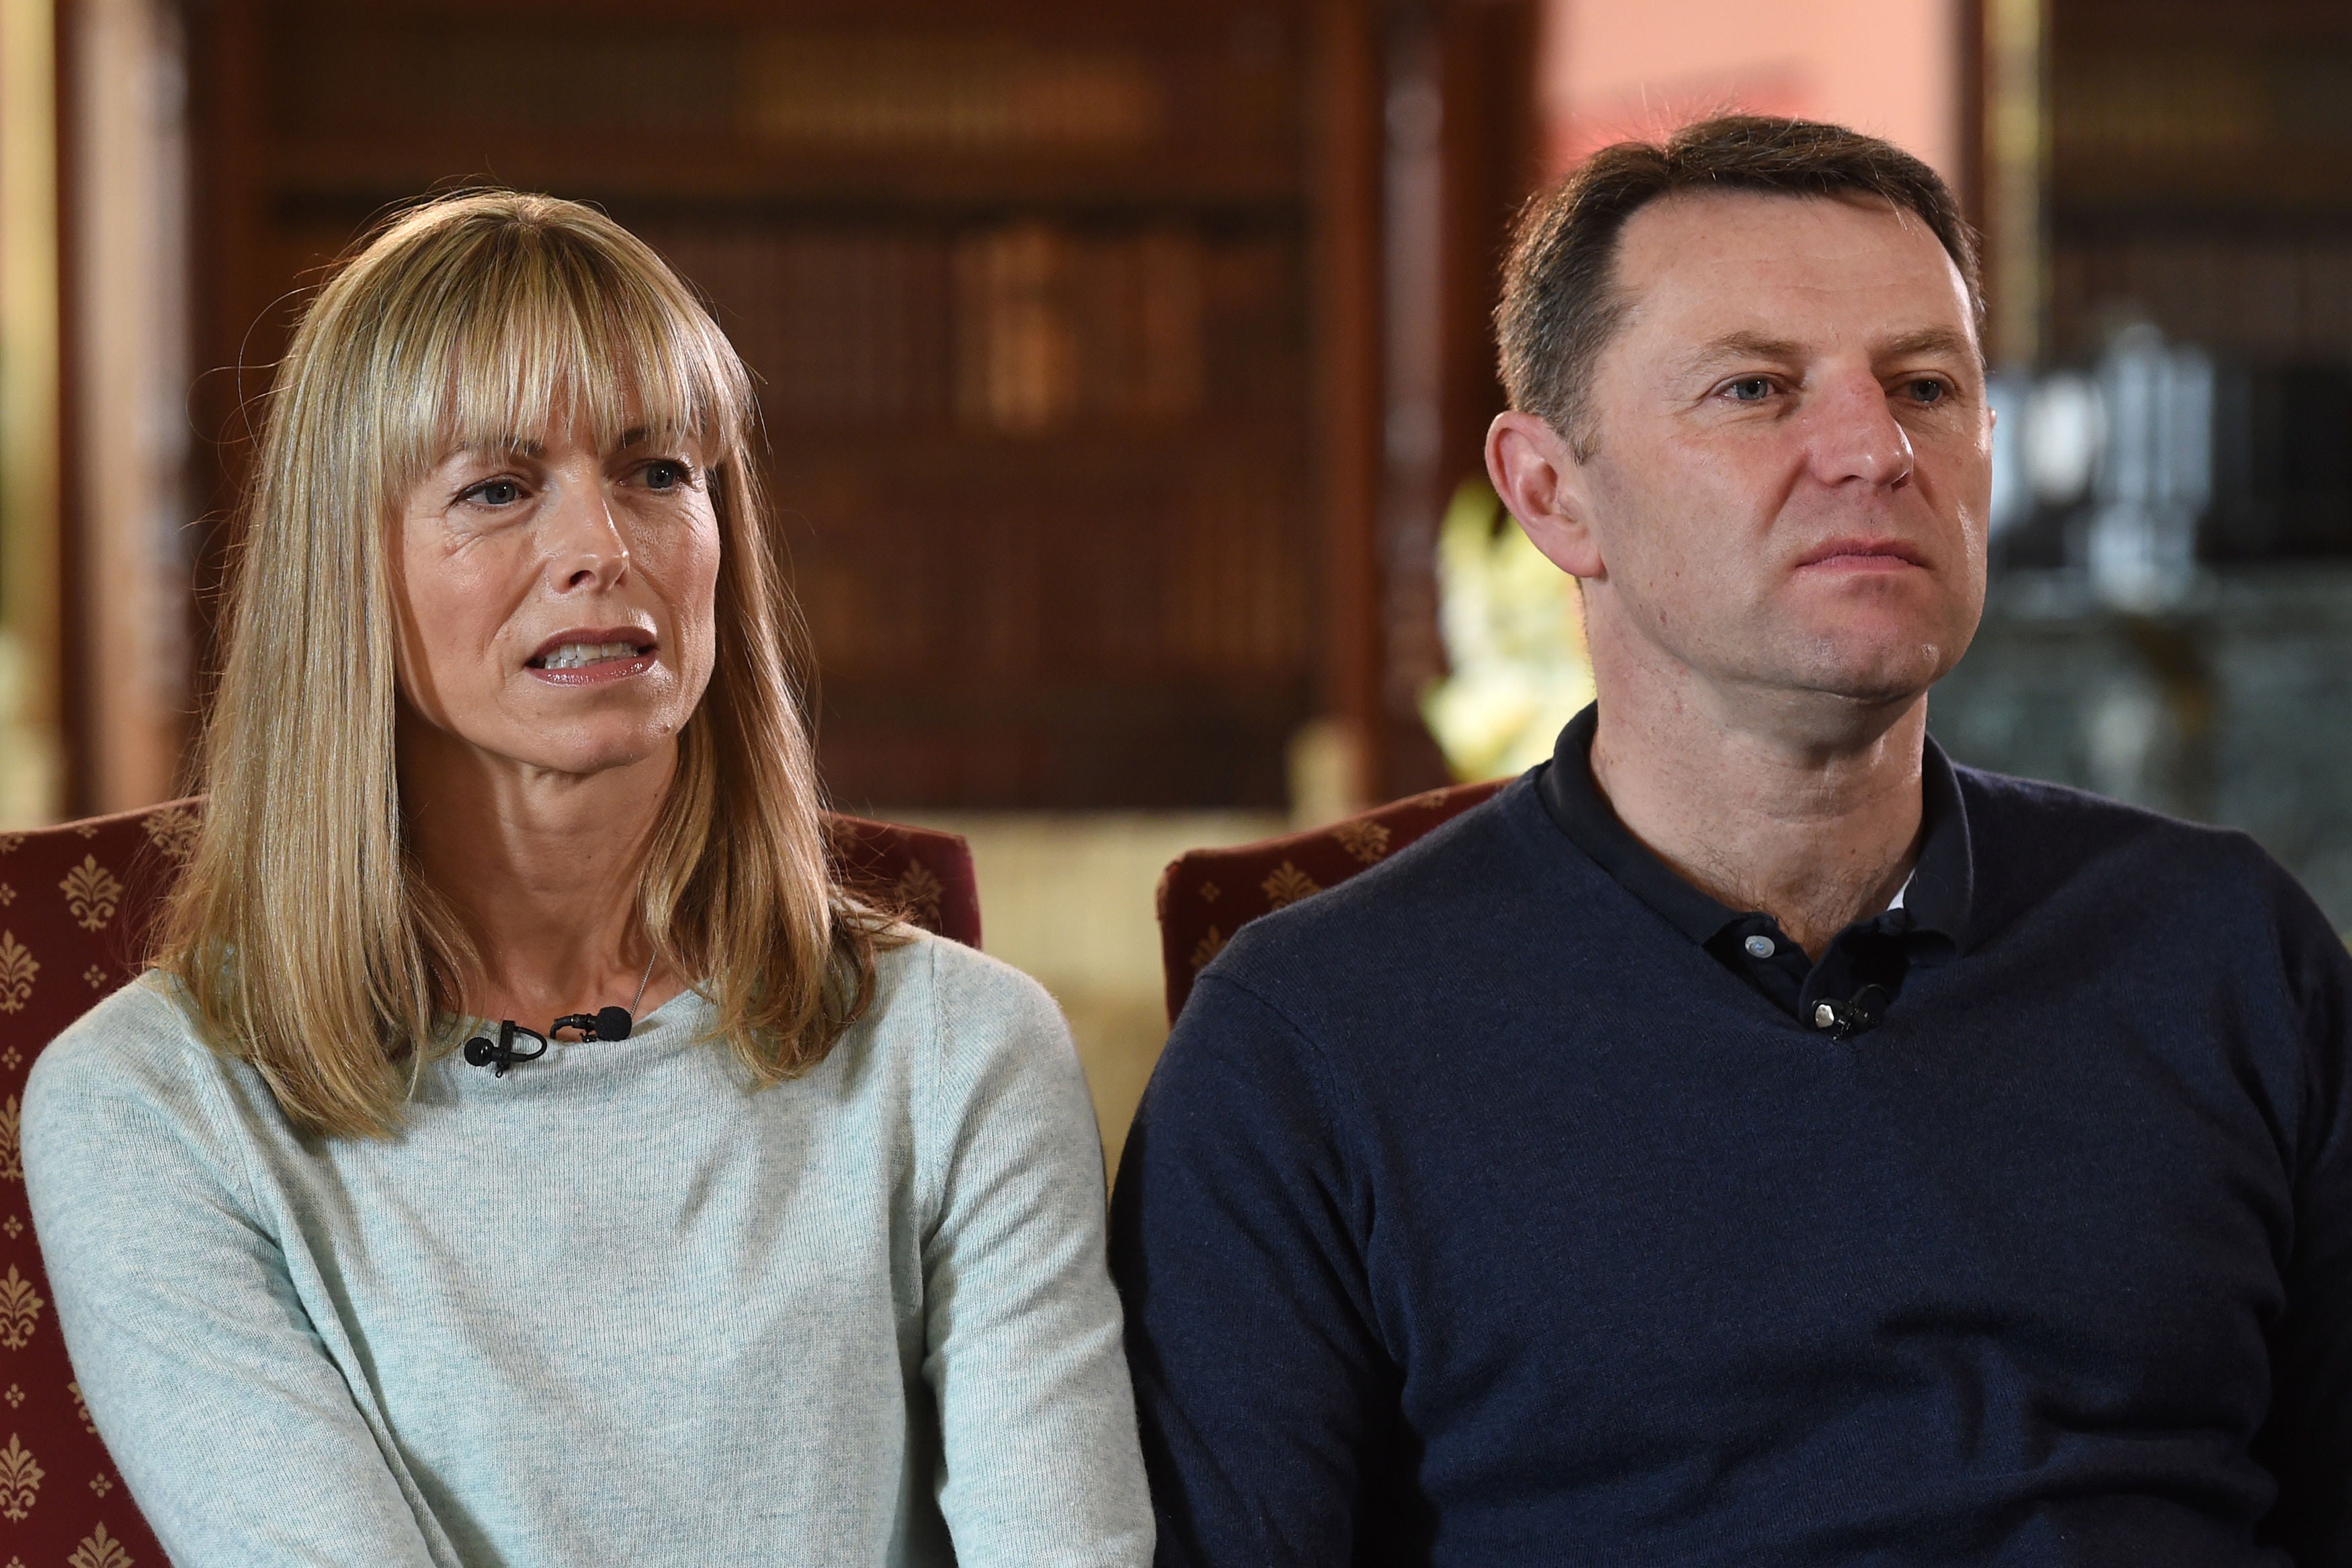 Madeleine McCann Where are the missing girls parents and twin siblings now? The Independent